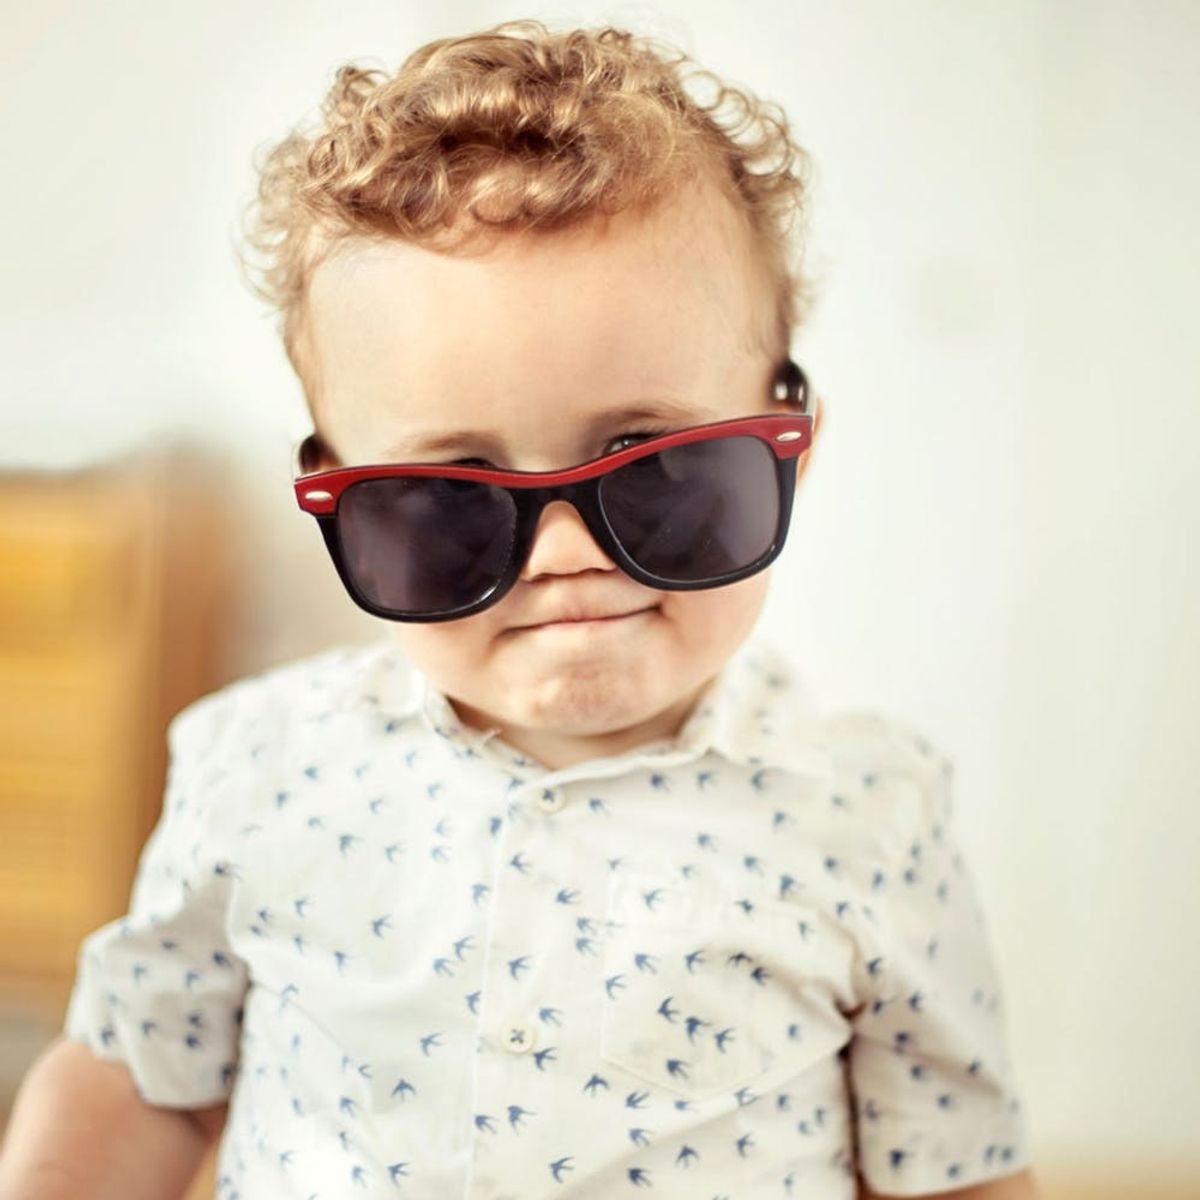 33 Baby Names All Your Friends Will Think Are Cool